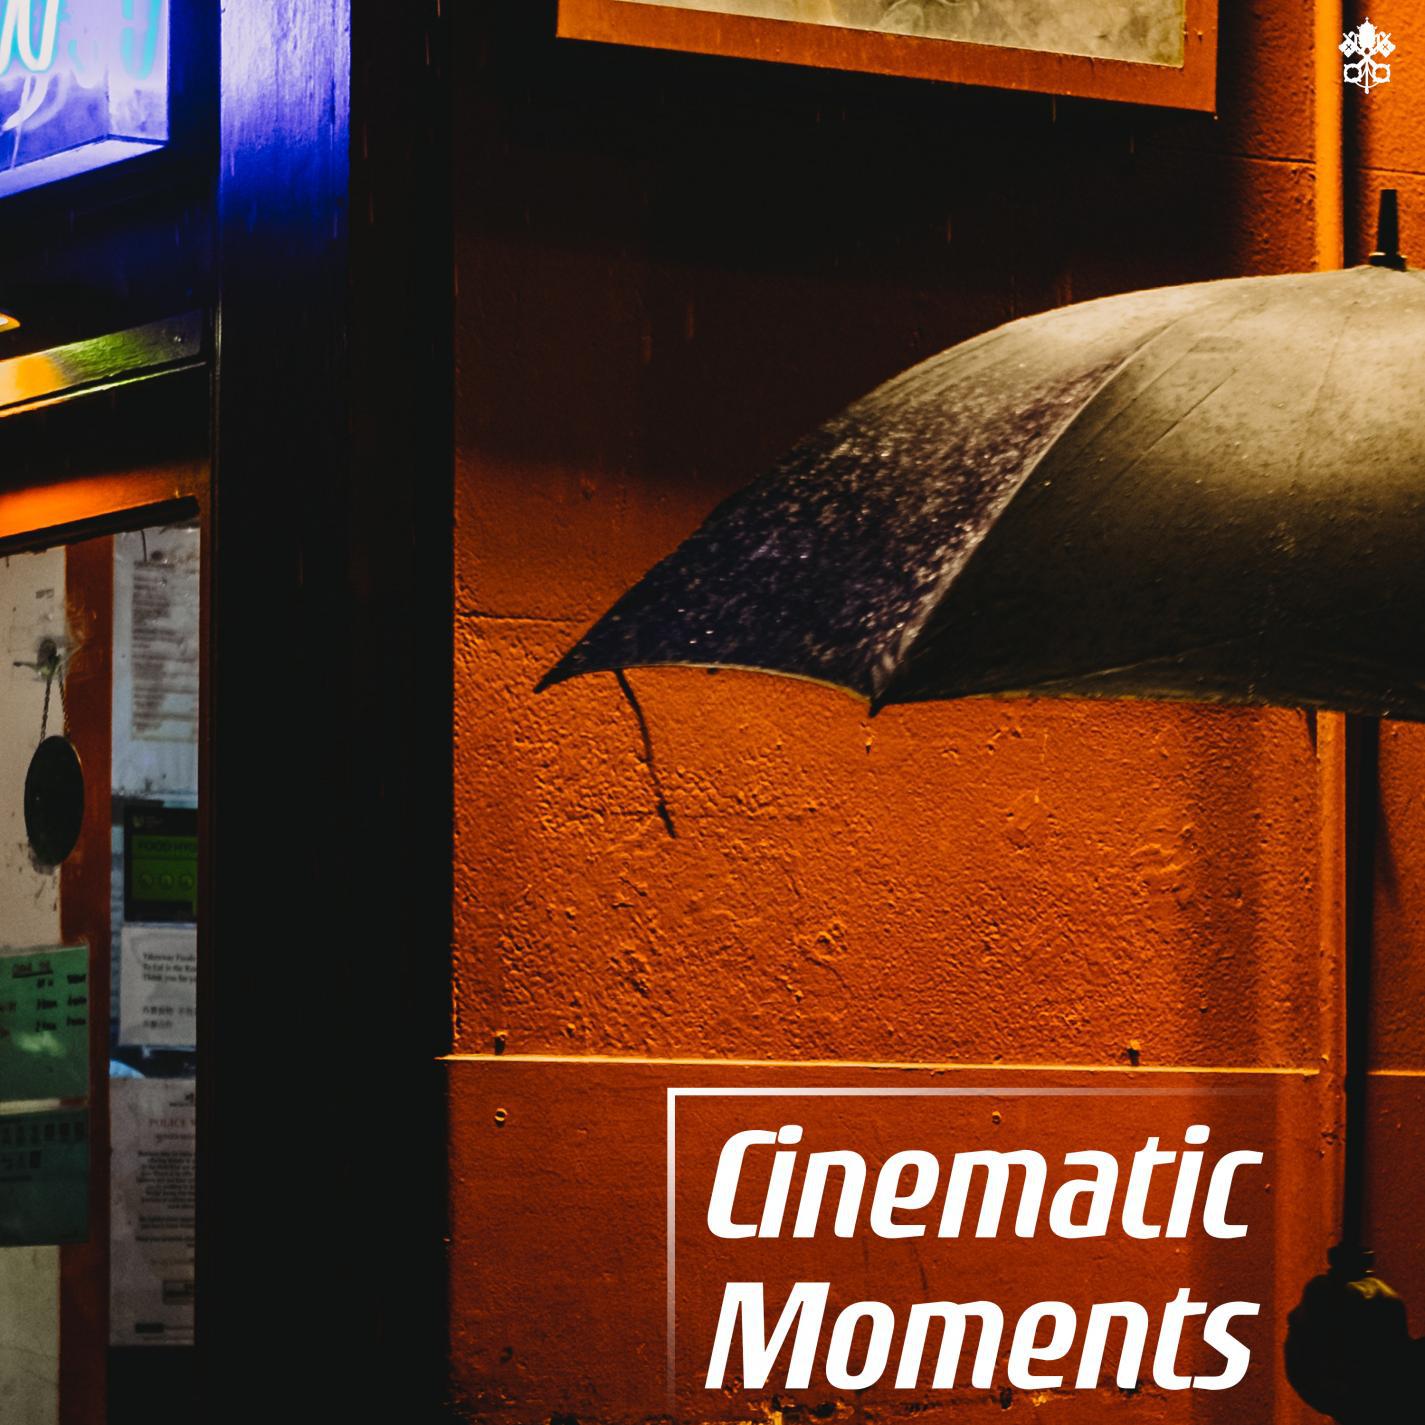 Cinematic Moments